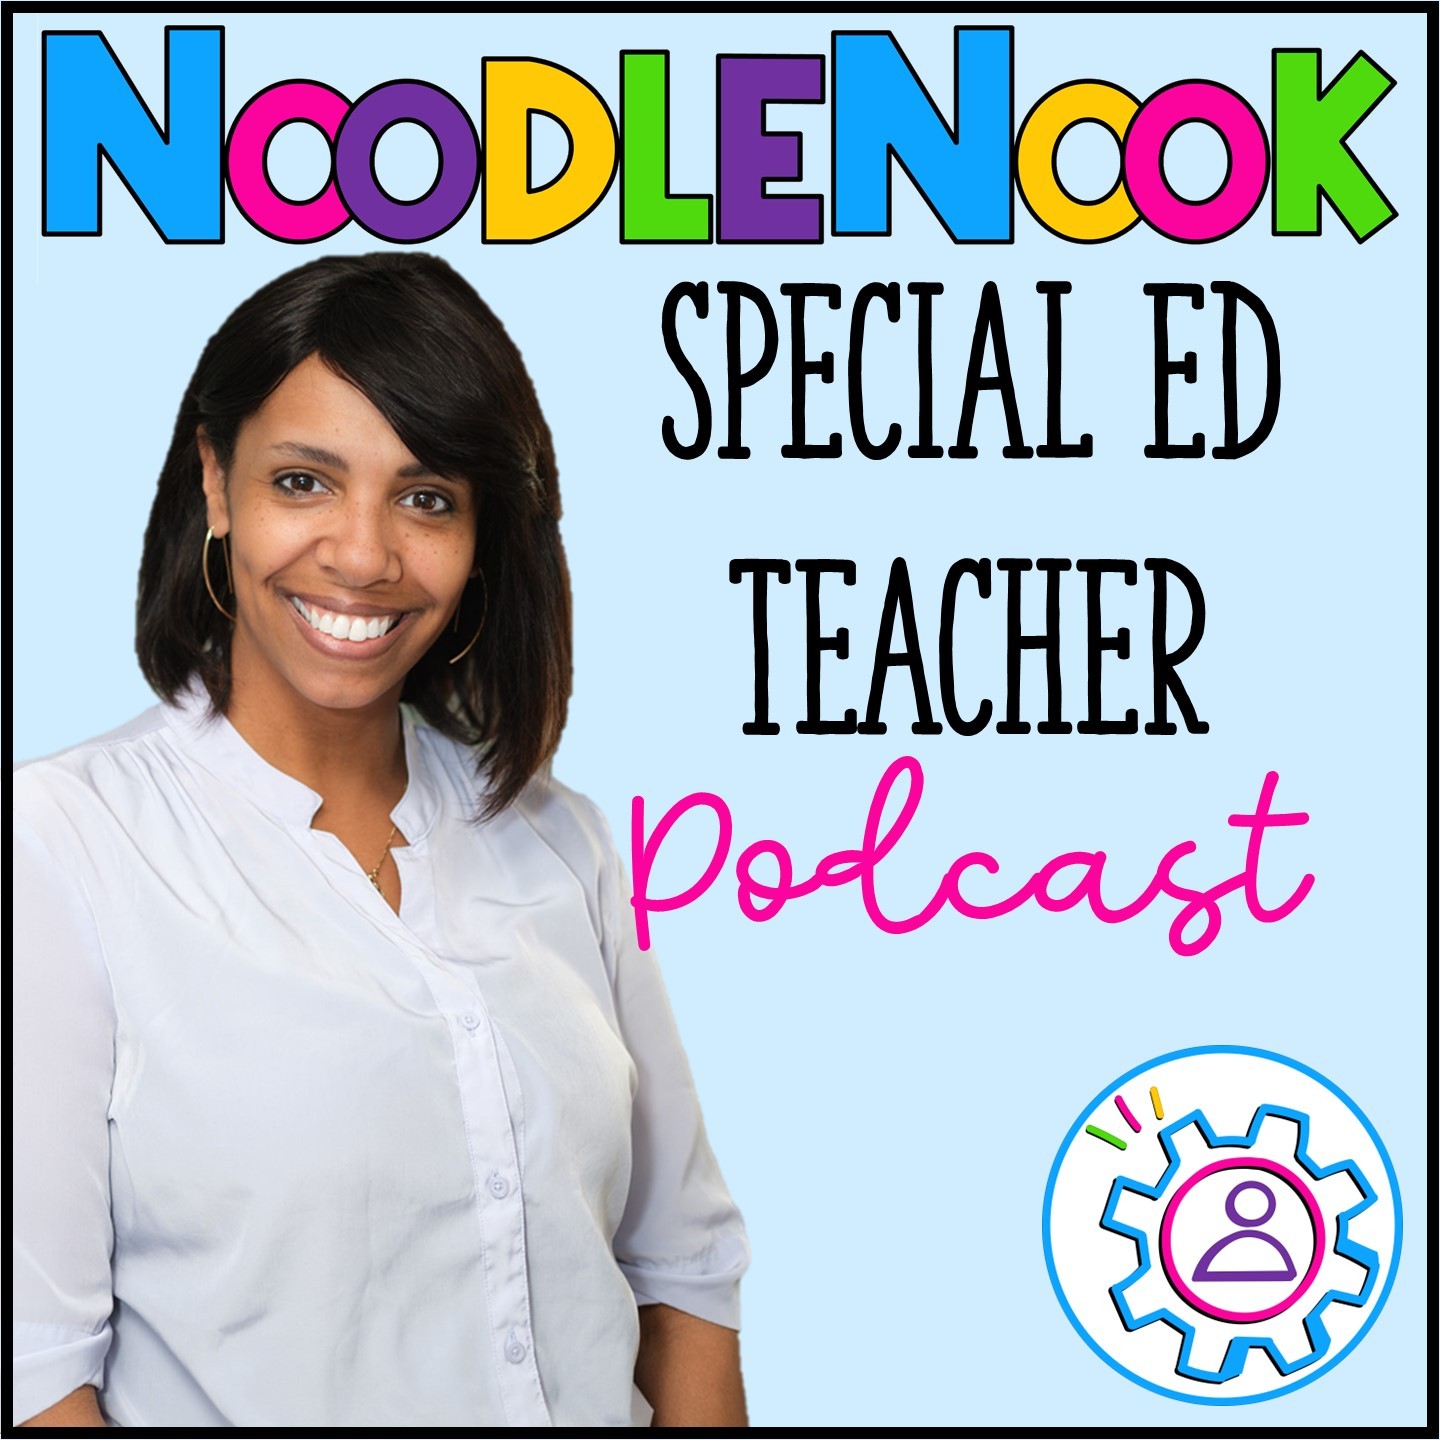 NoodleNook: A Podcast for Special Ed Teachers with Tips, Tricks and Tools Just for SpEd